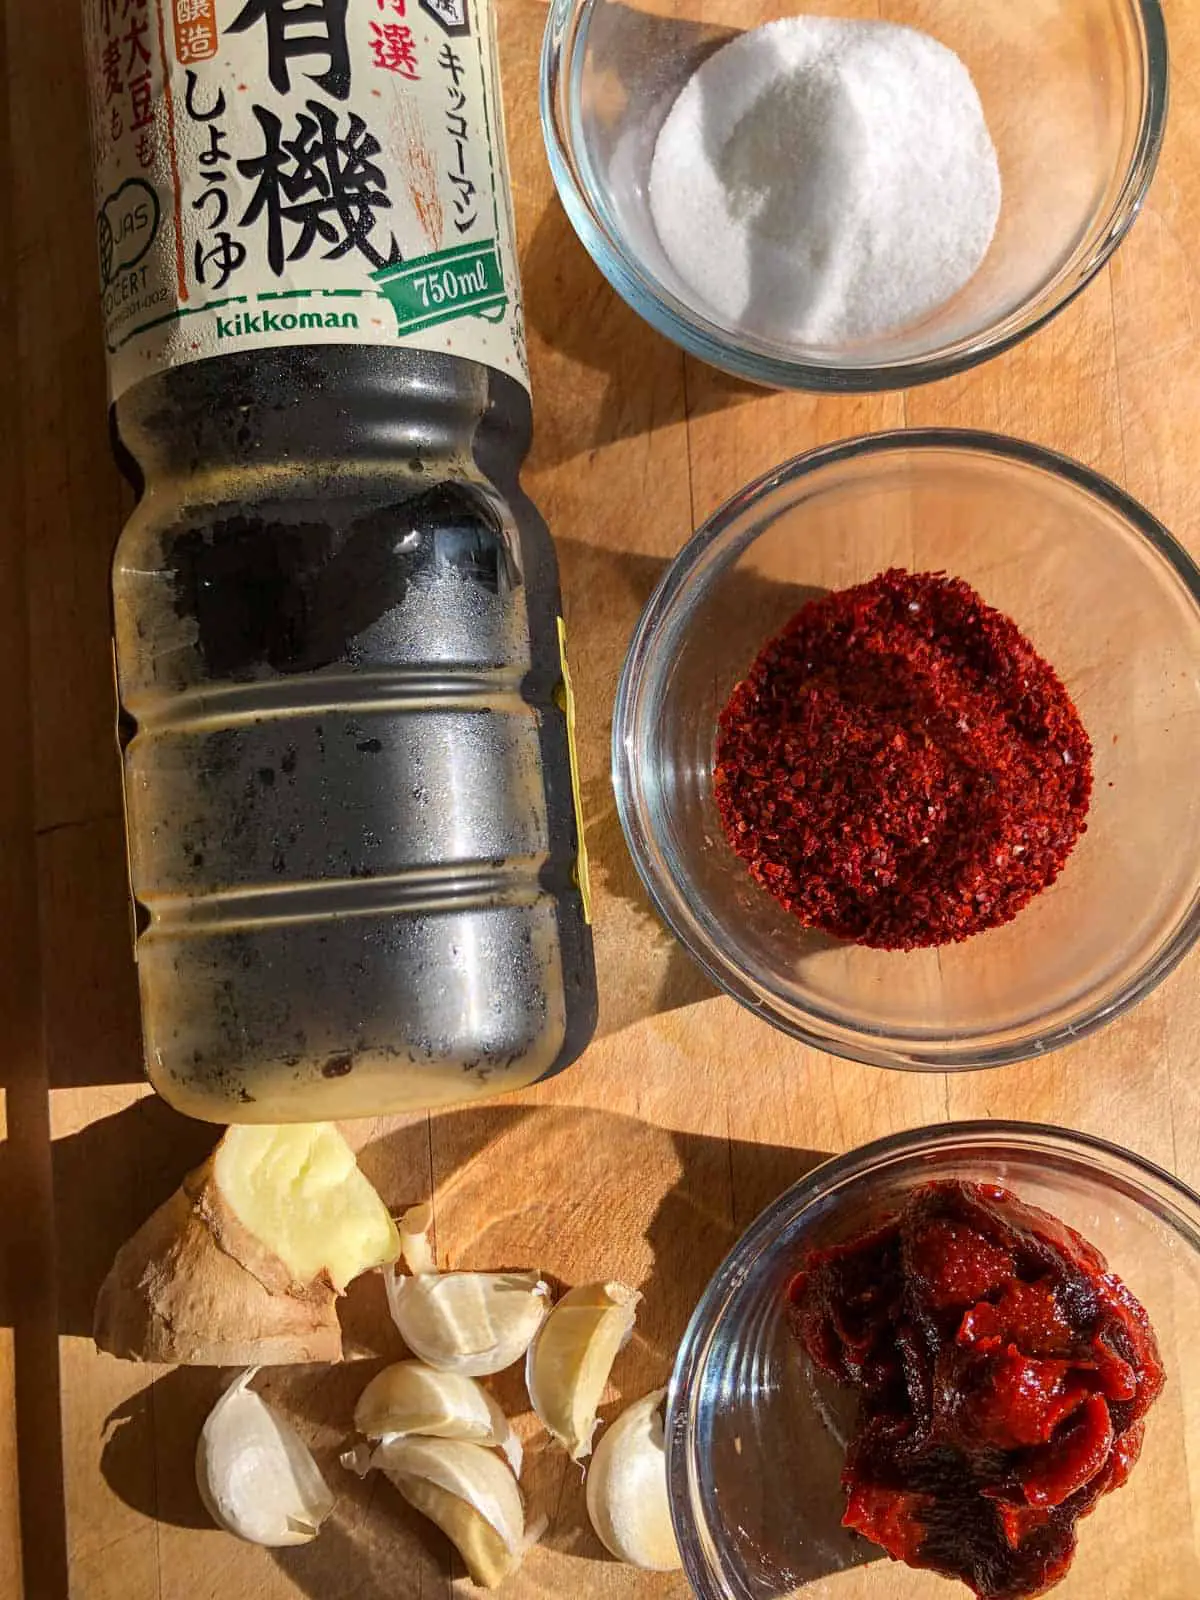 Bottle of soy sauce, glass dishes containing sugar, gochugaru, gochujang, piece of ginger, and some garlic cloves on a wooden board.